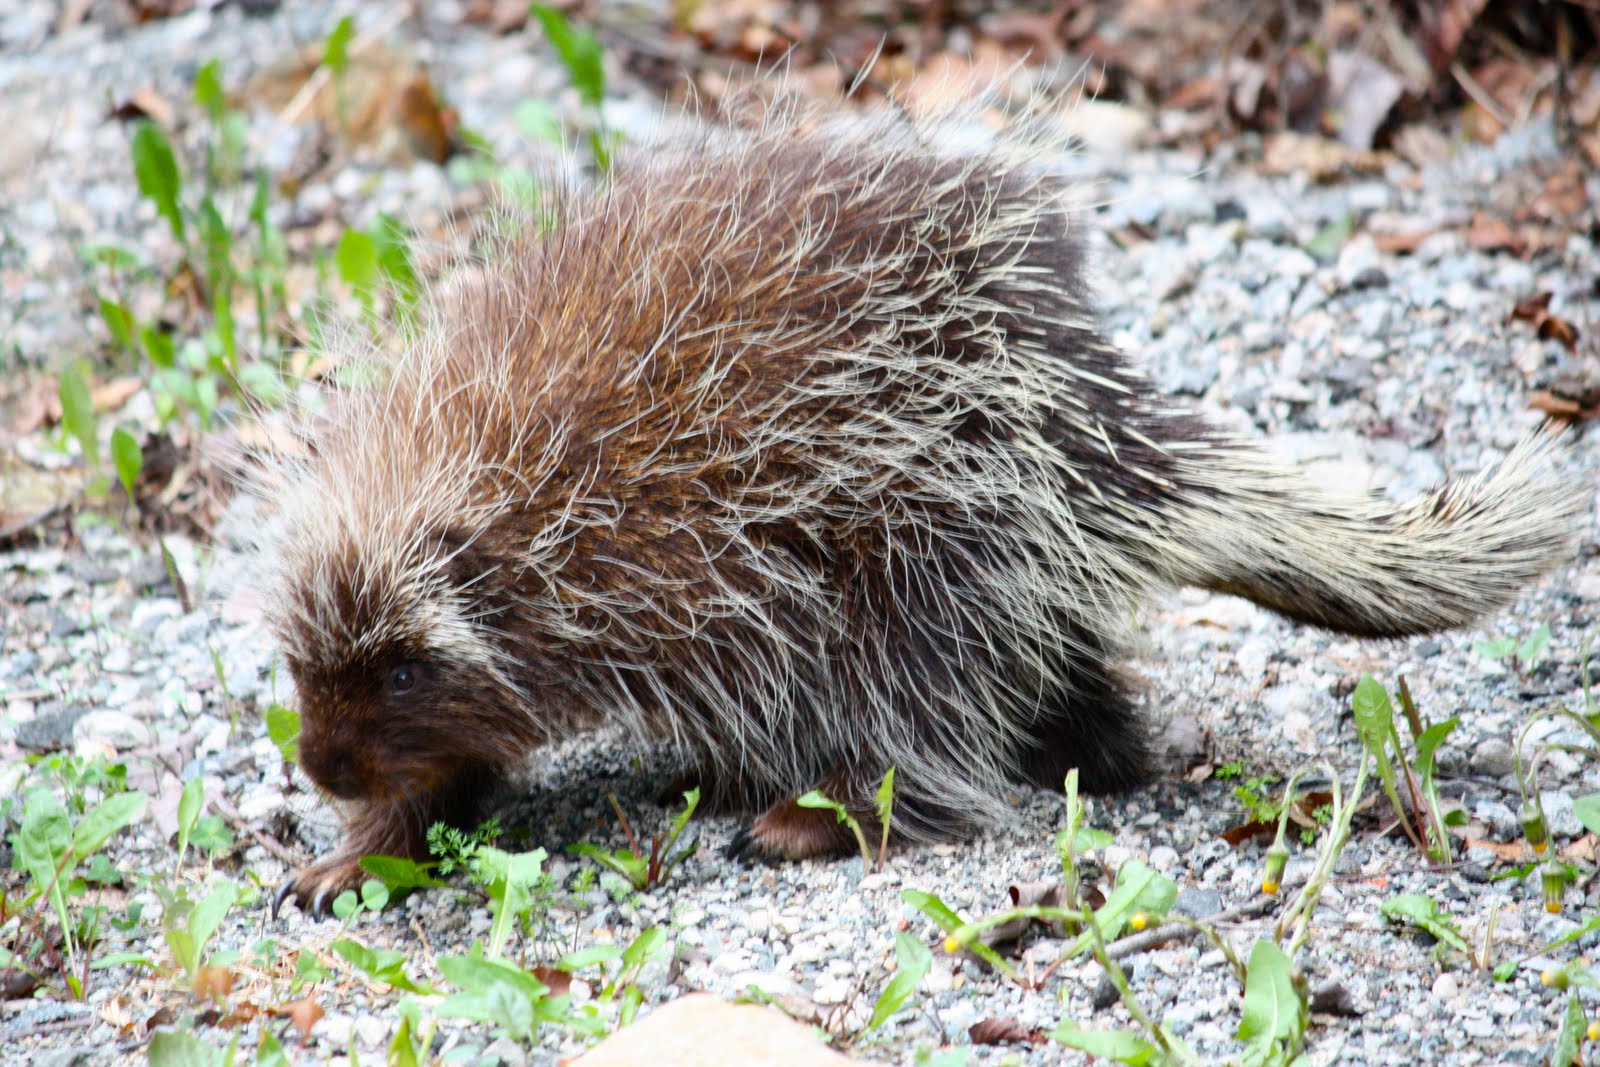 murmuring trees: New Jersey Porcupine